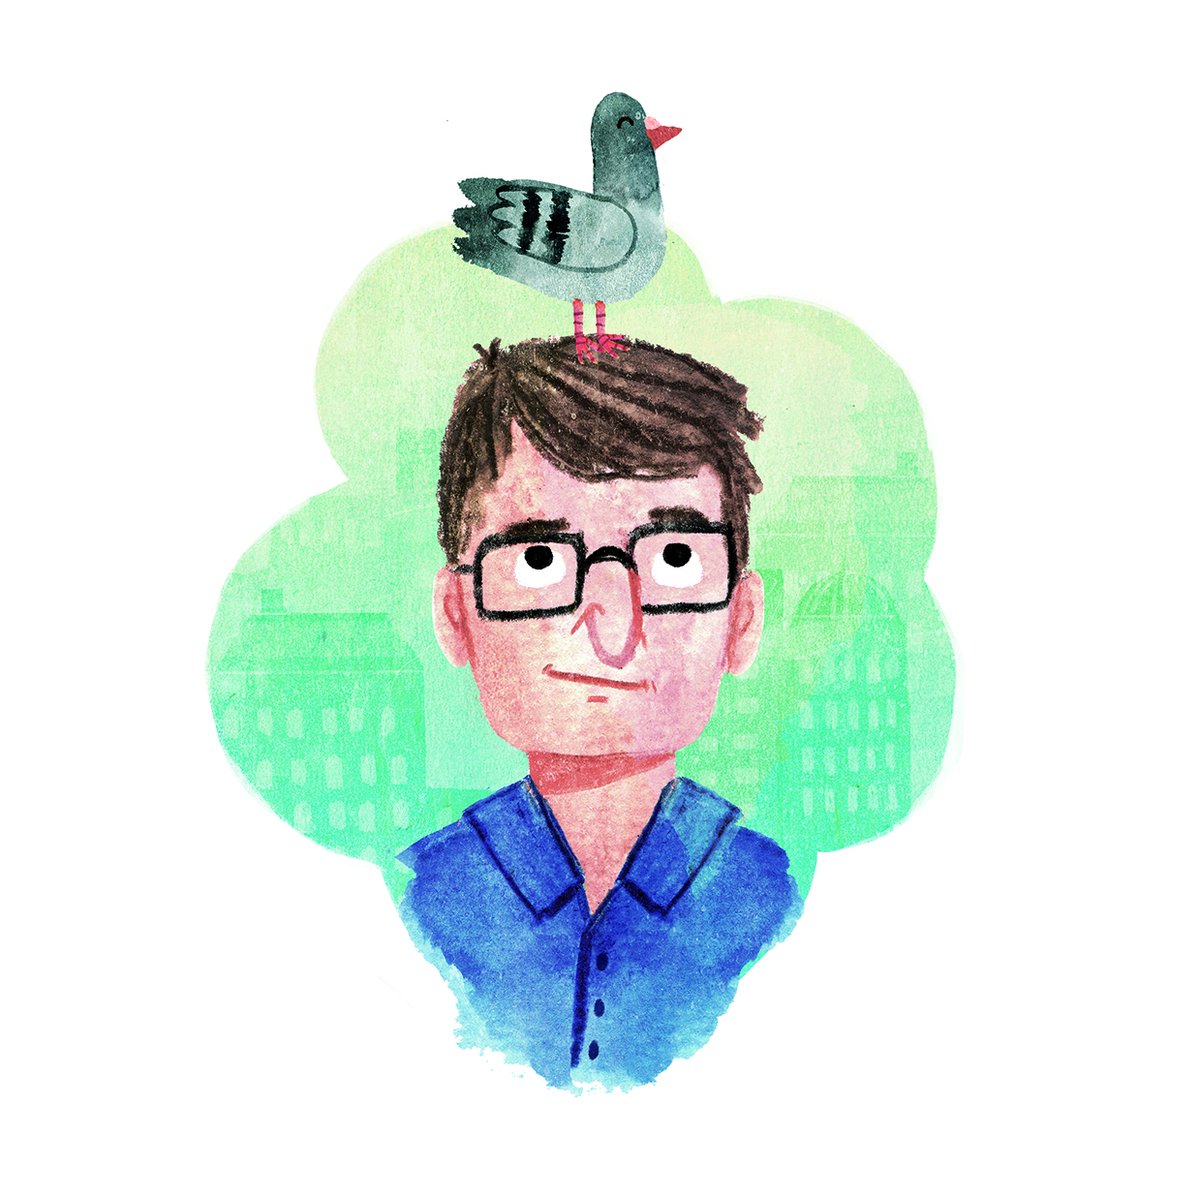 We're so excited that @louistheroux will be reading Peggy the Always Sorry Pigeon by @WendyMeddour on @CBeebiesHQ Bedtime Stories this Friday 2nd December! 

Artwork by Carmen Saldaña
#PeggyTheAlwaysSorryPigeon